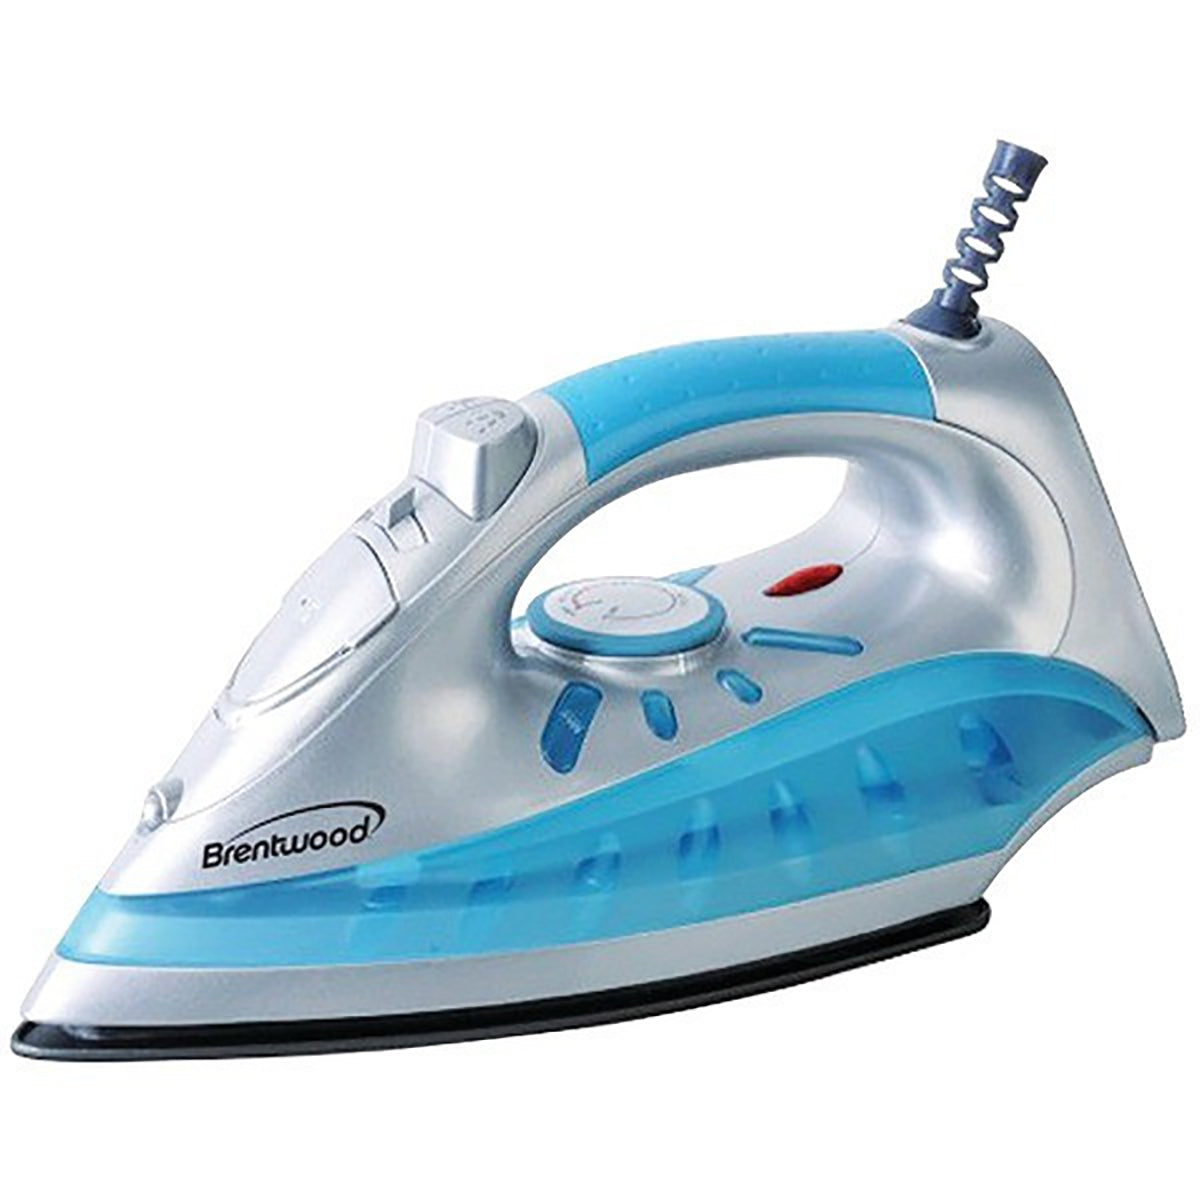 Steamer Iron Non-stick Blue (1200 Watts) By Brentwood